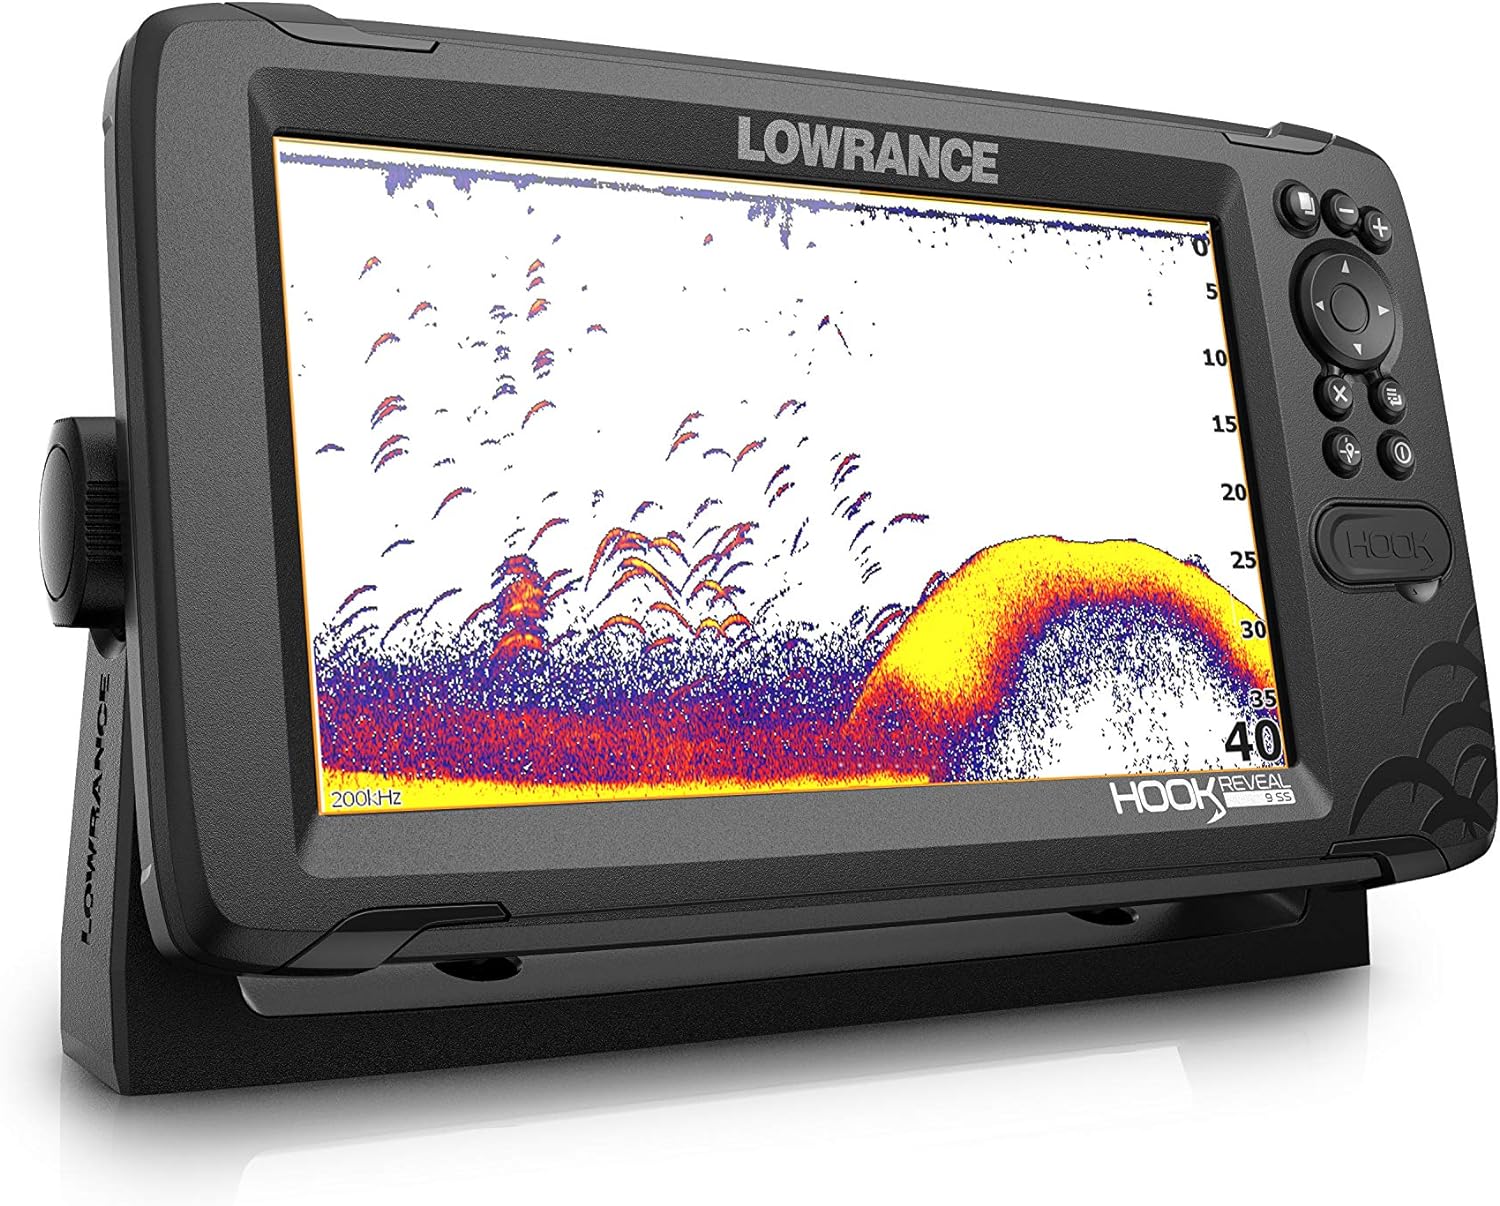 Lowrance Hook Reveal 9 inch Fishfinders with Preloaded C-MAP Options - Lowrance Hook Reveal 9 Inch Fishfinders Review